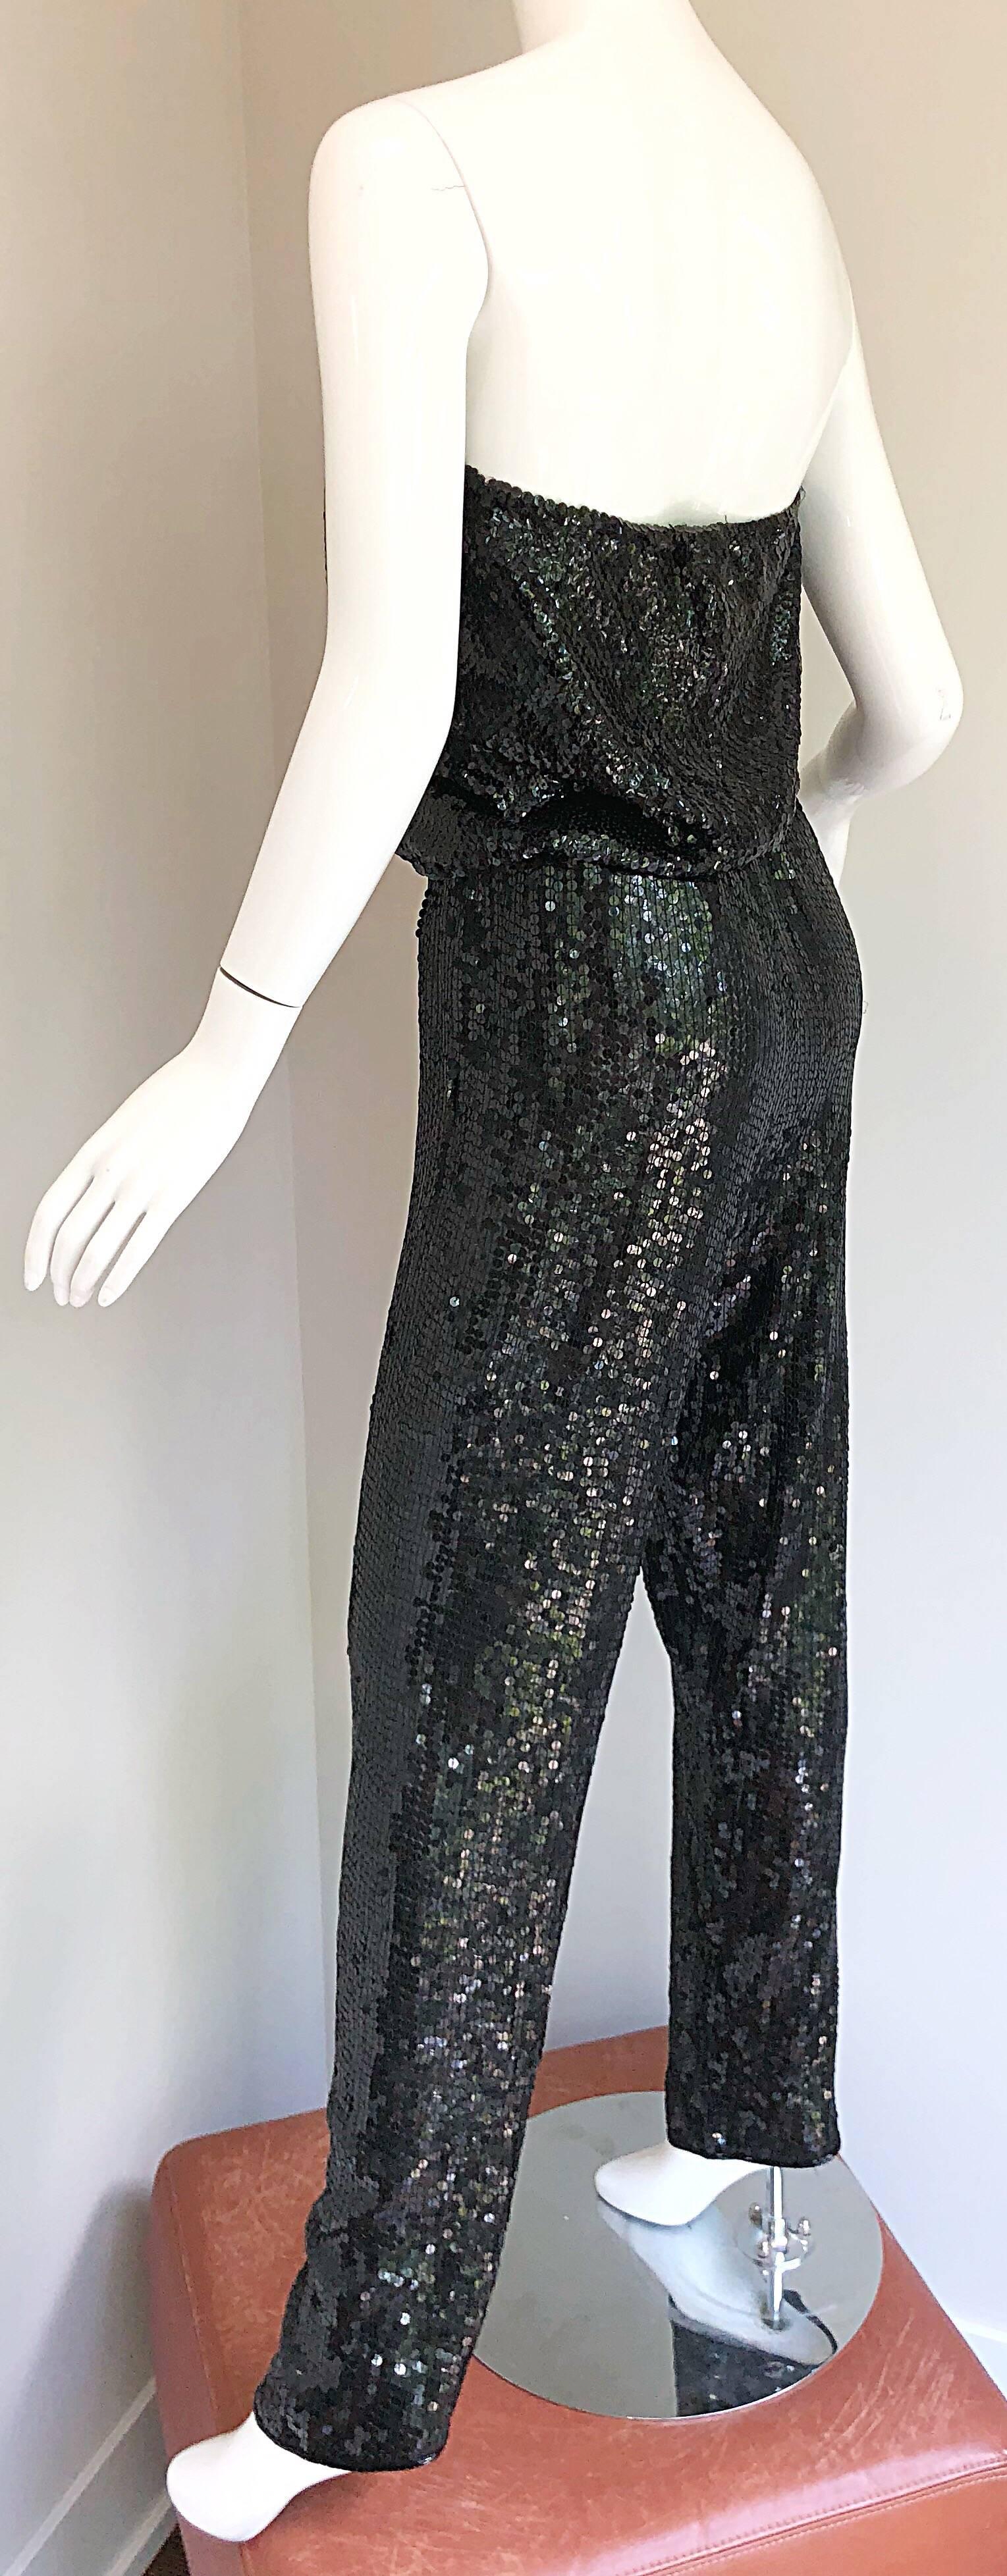 1970s Halston Black Silk Chiffon Fully Sequined 70s Strapless Tube Top + Pants 2